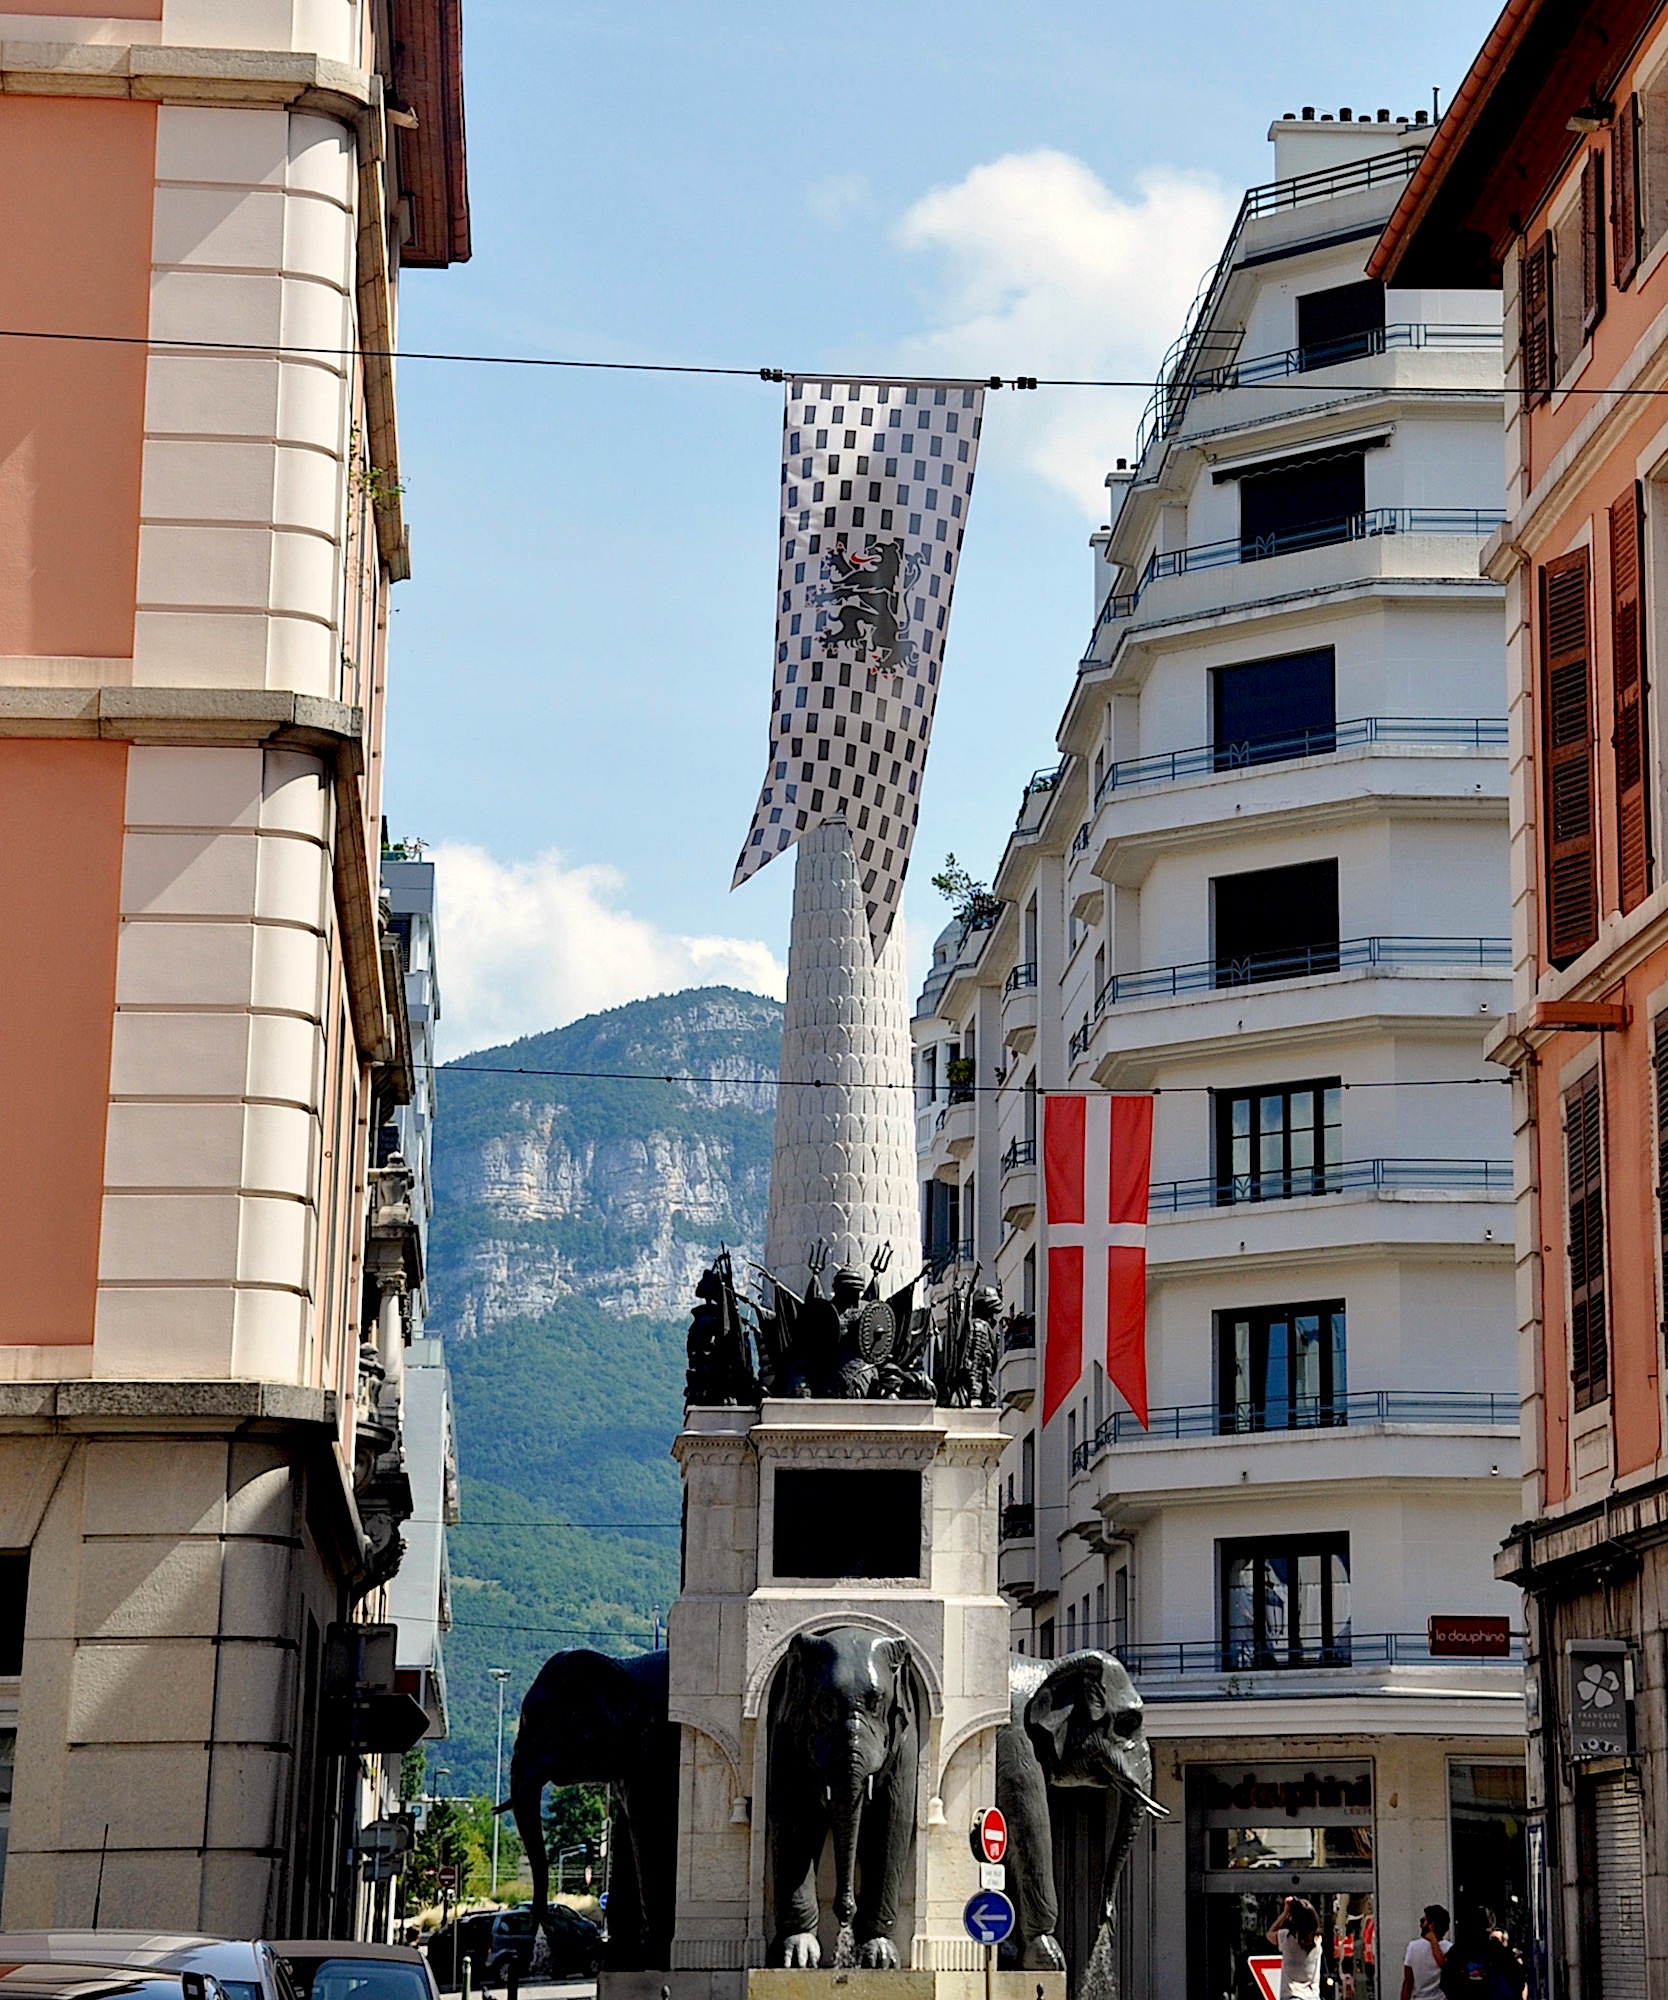 The Fontain of the Elephants in Chambery France